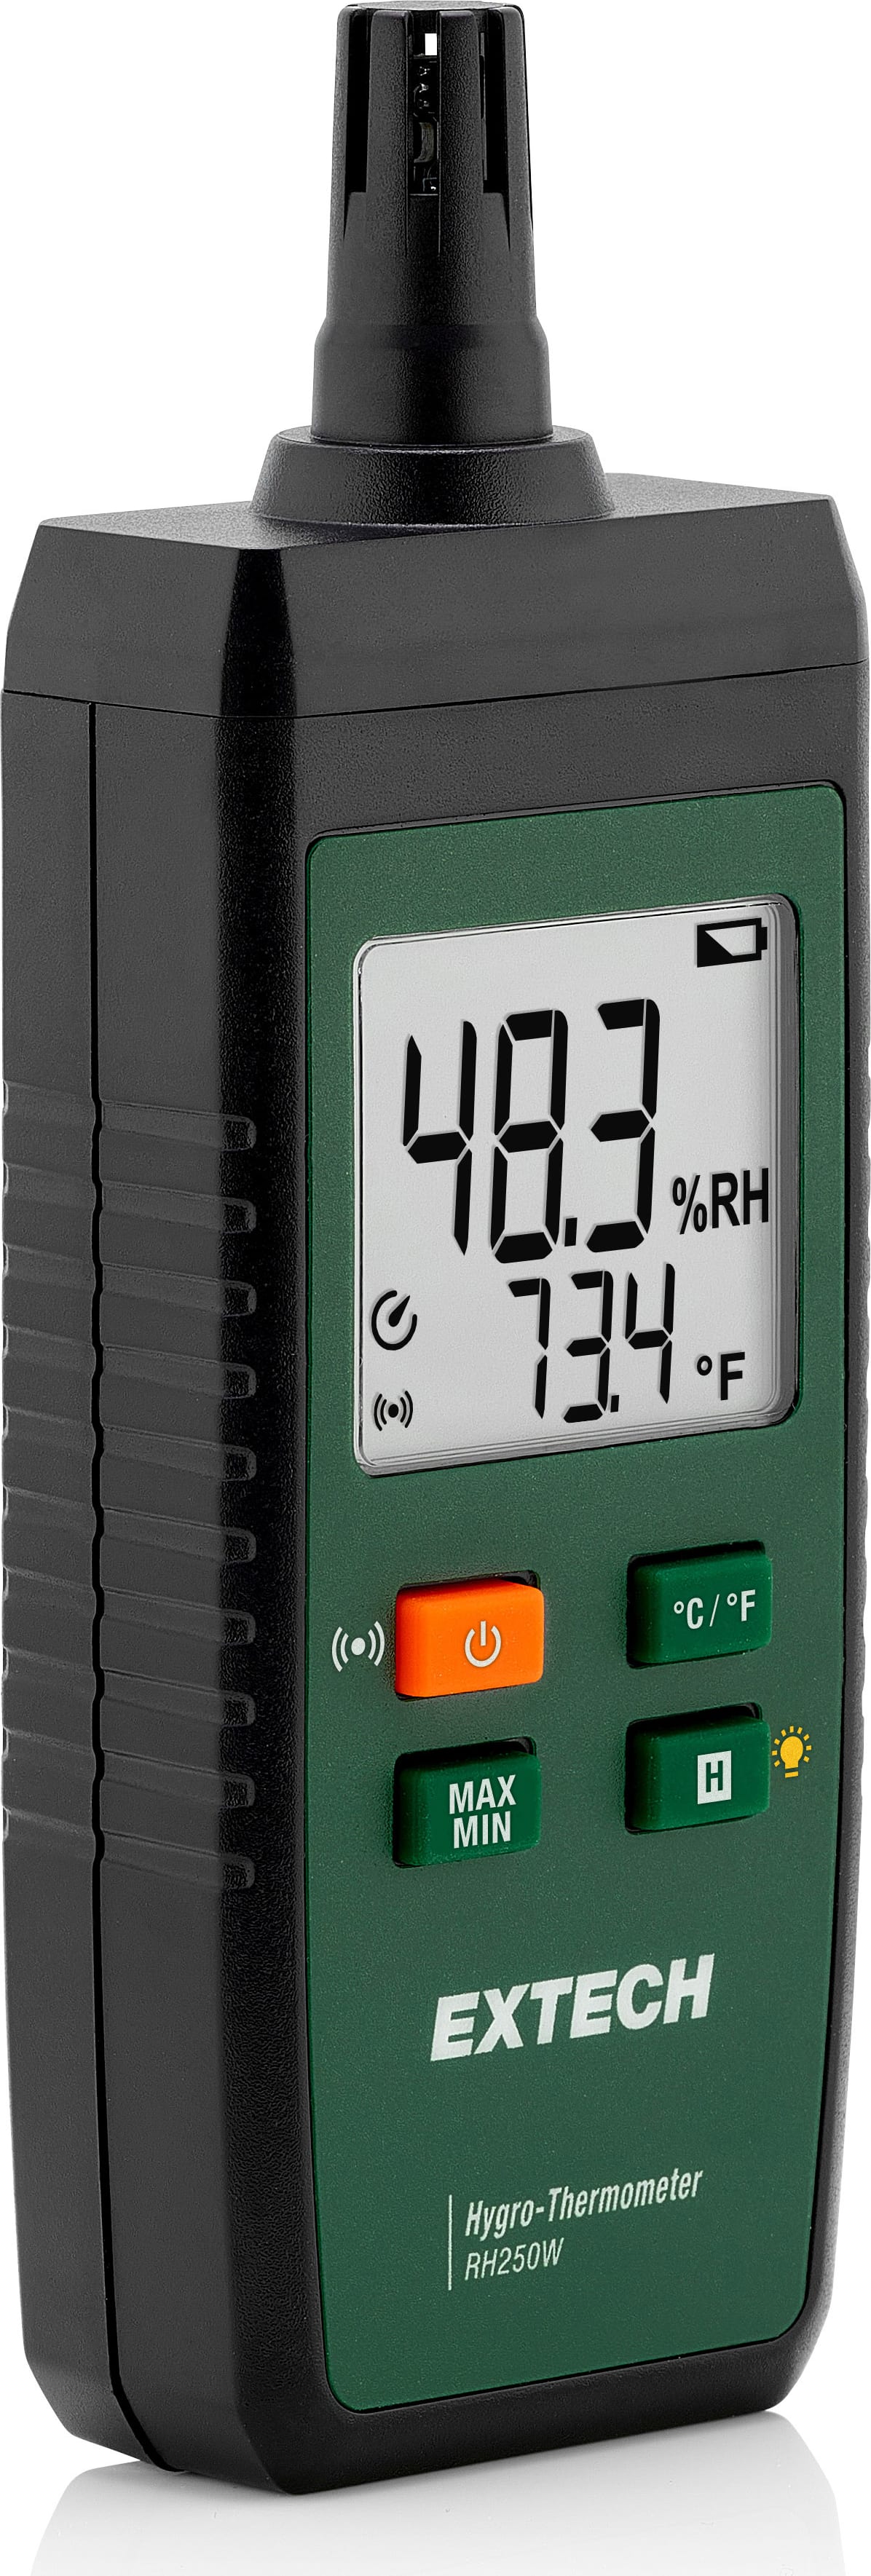 Extech RH250W - Hygro-Thermometer with Connectivity to ExView App